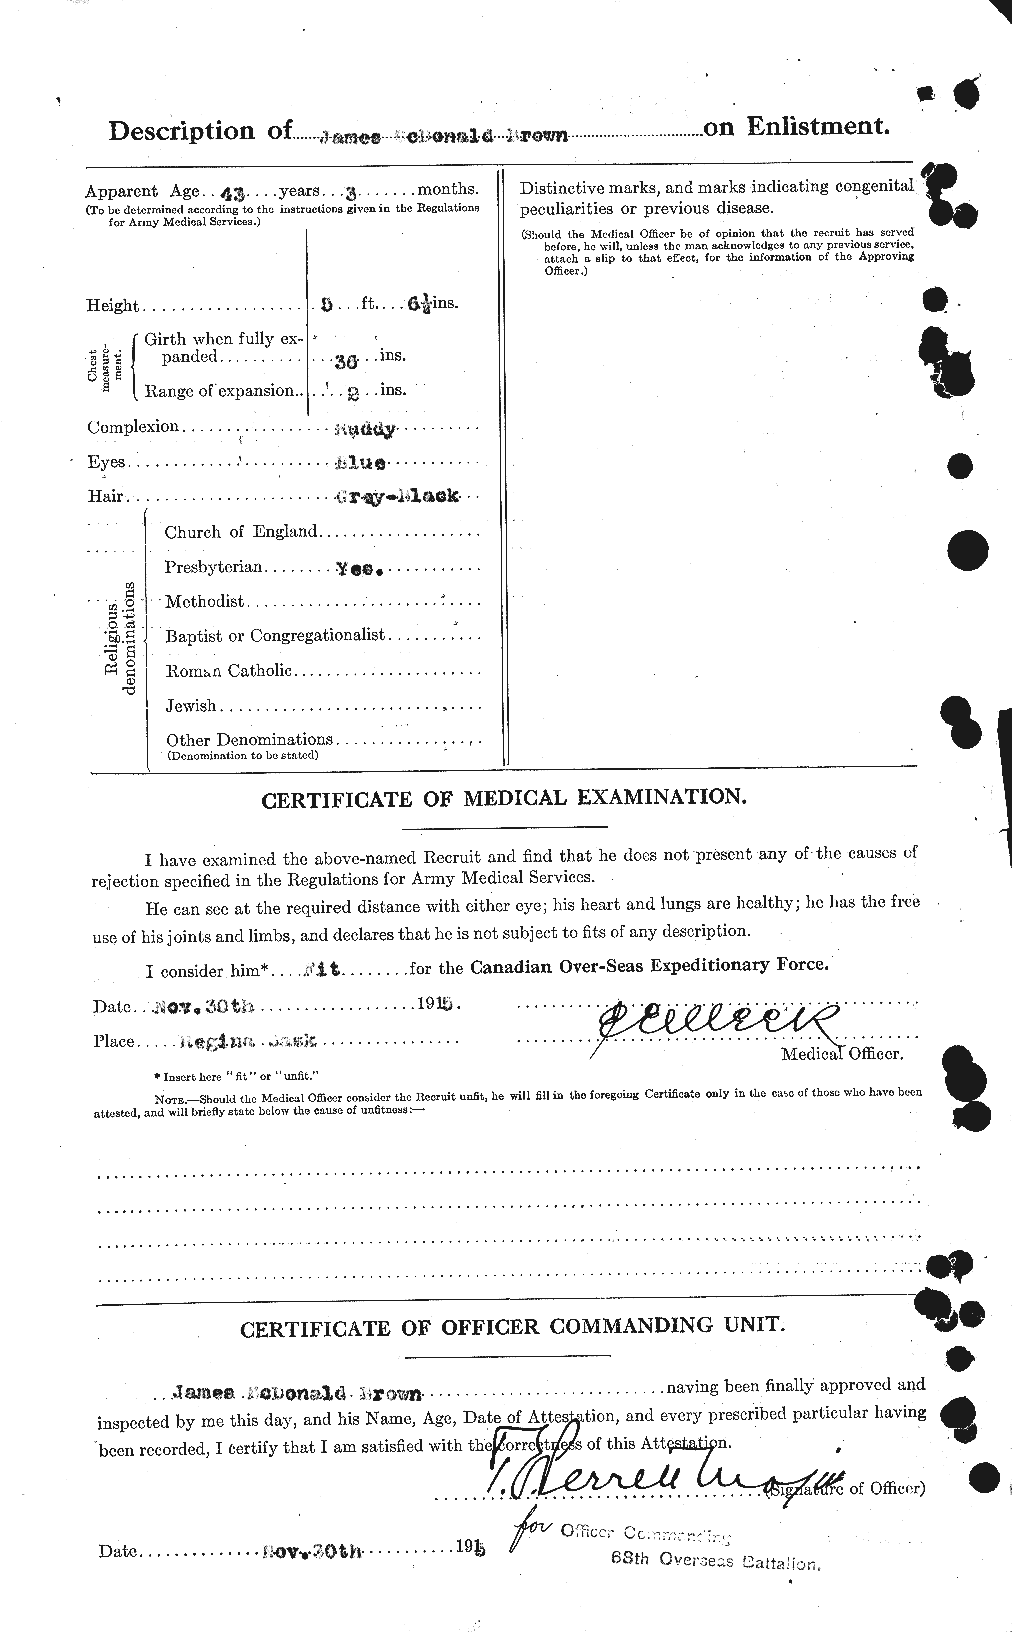 Personnel Records of the First World War - CEF 269555b